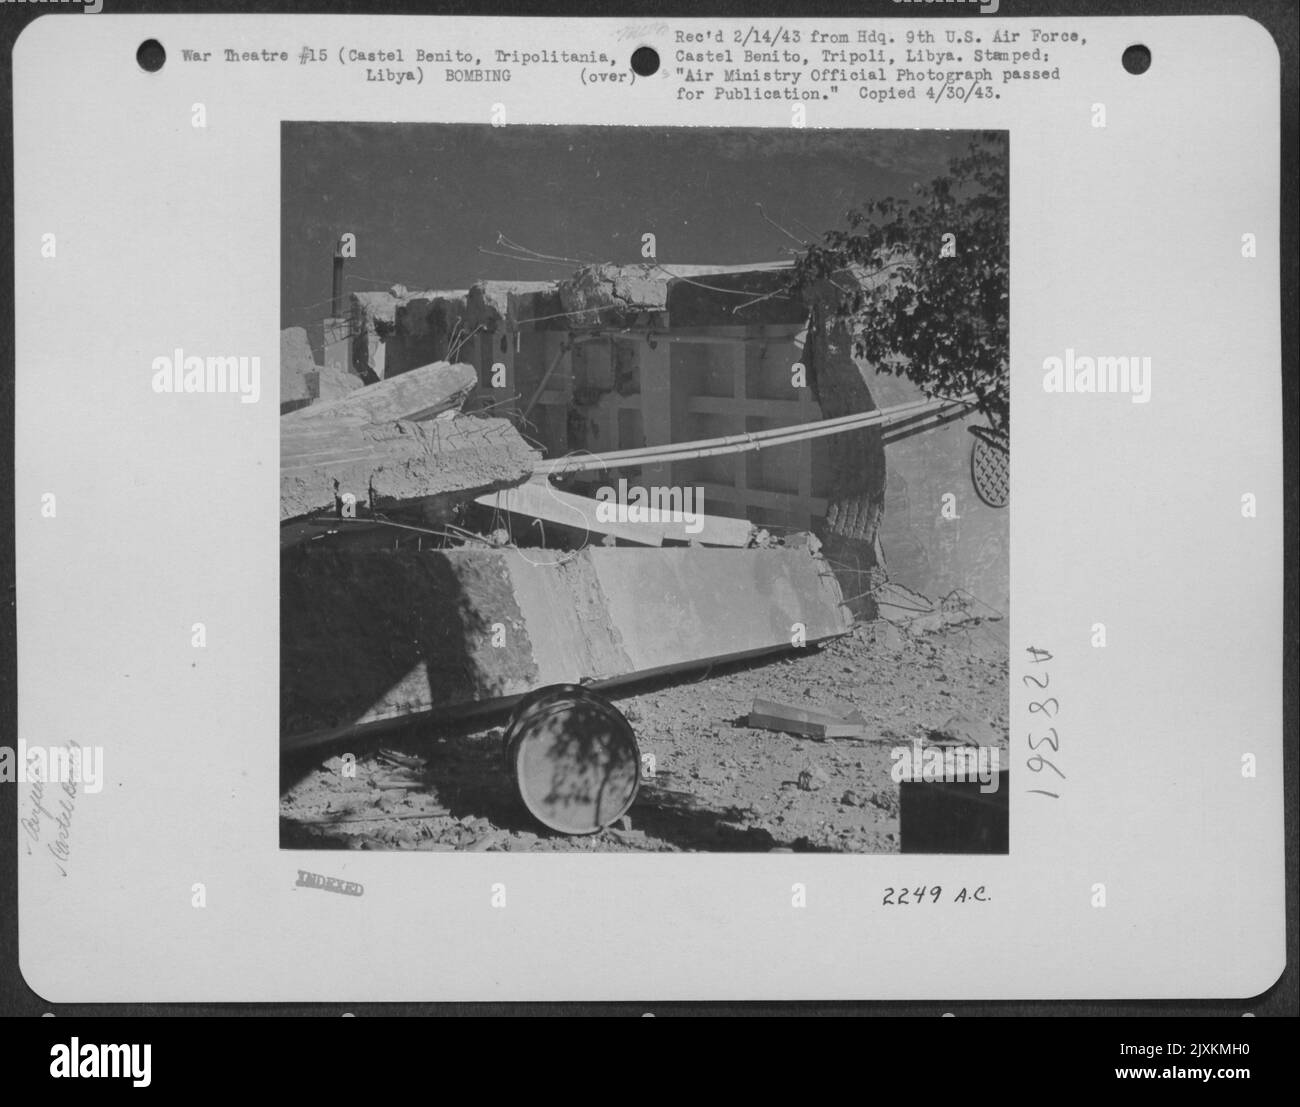 Bomb-shattered administrative buildings on the airfield at Castel Benito, Tripolitania, Libya, the most important airbase around Tripoli. The Regia Aeronautica had permanent quarters there until the Allies moved in. 26 January 1943. Stock Photo